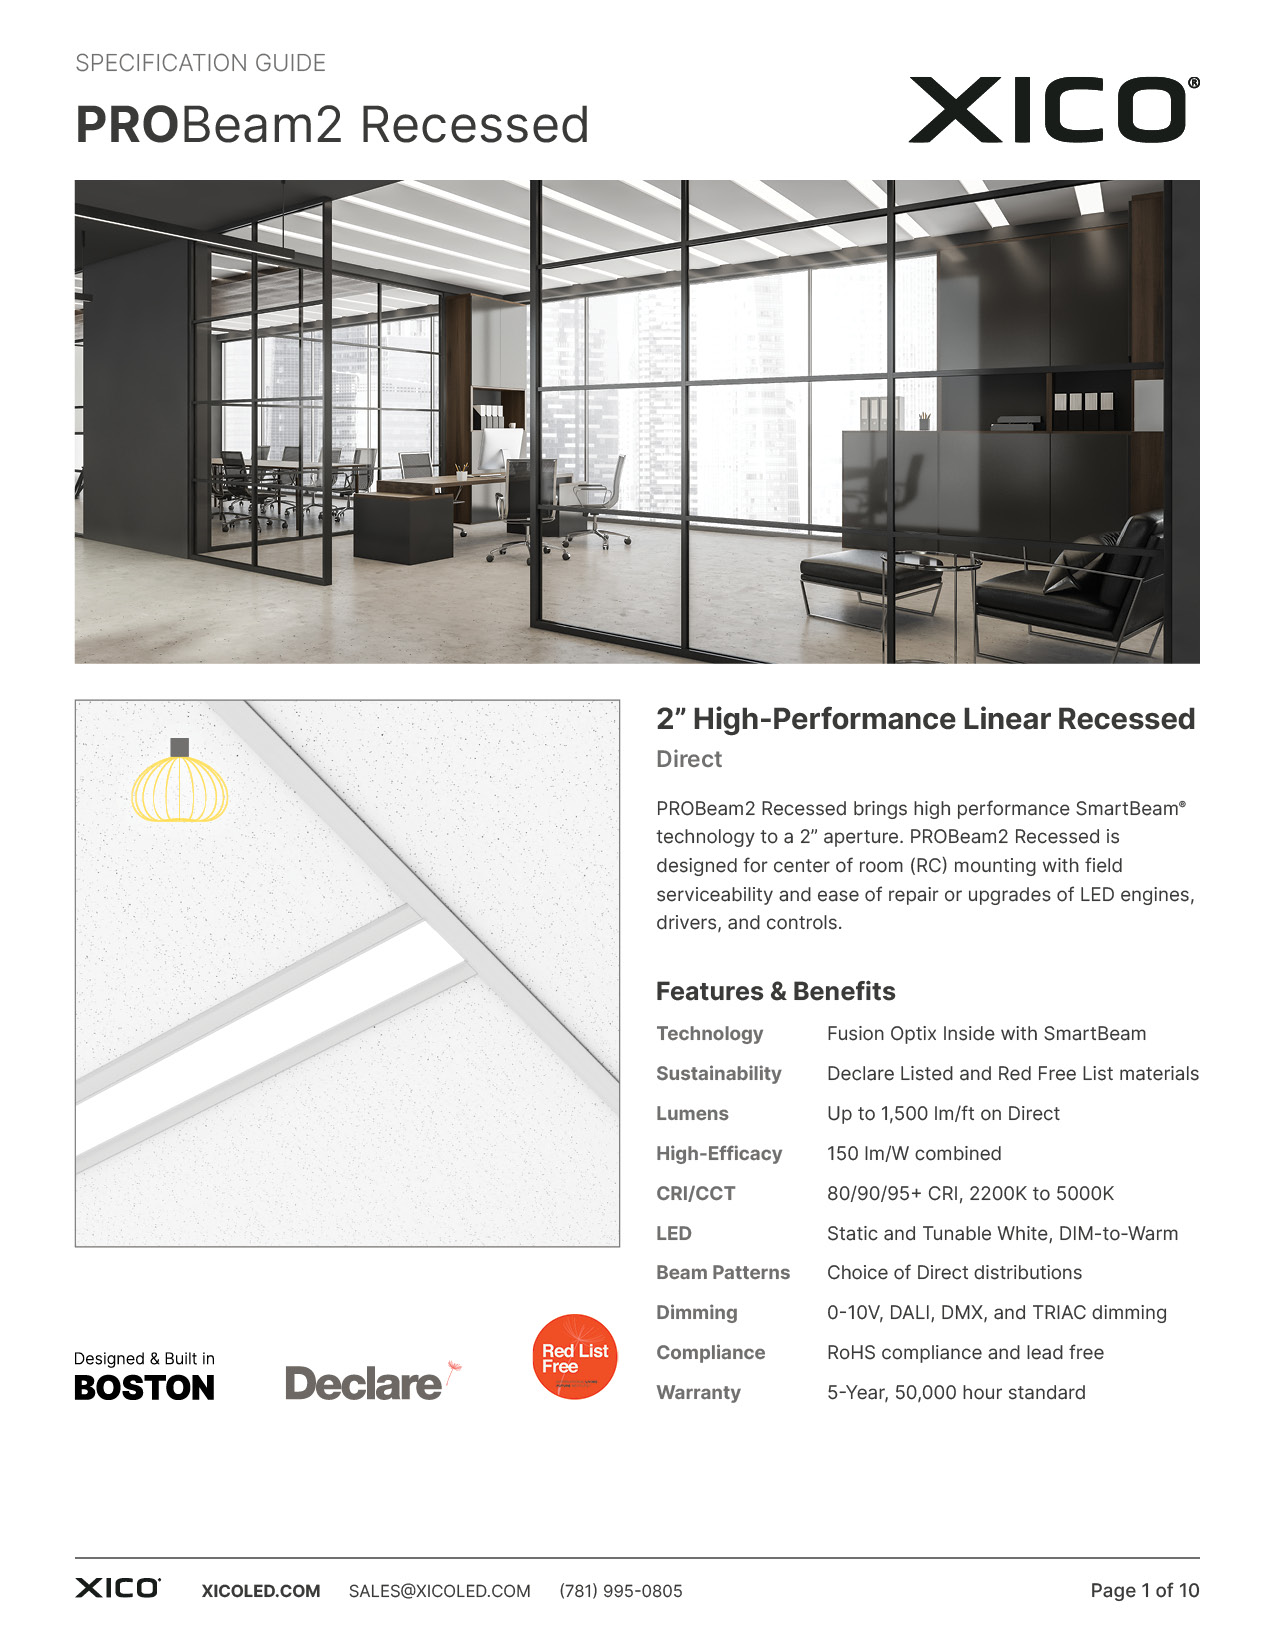 PROBeam2 Recessed Specification Guide